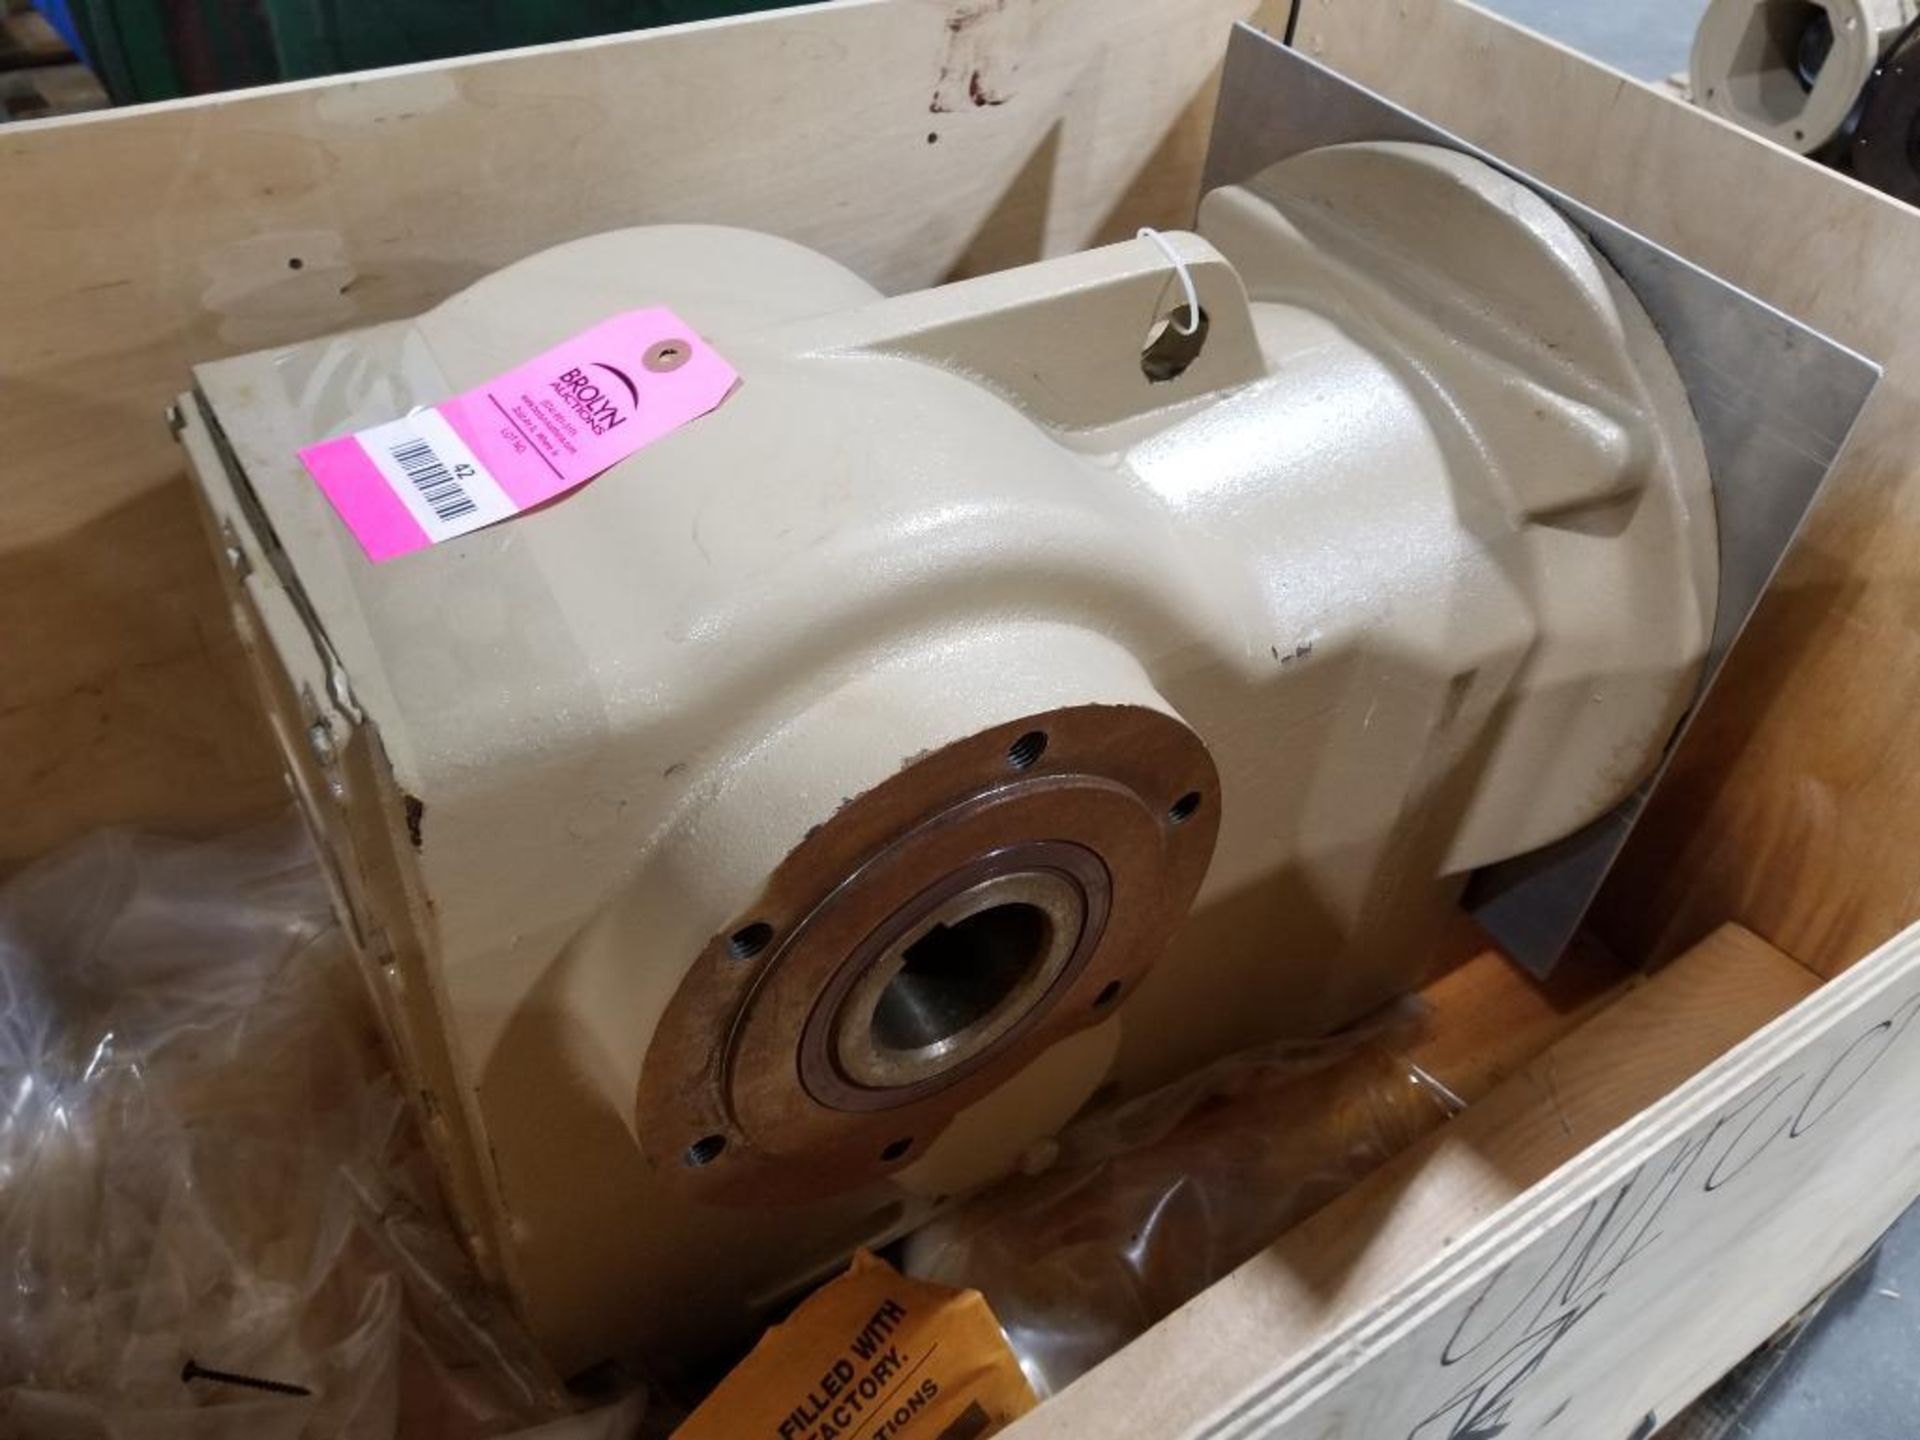 Hub City worm gear box. 10.82:1 ratio. Model HB2093AS. New as pictured.